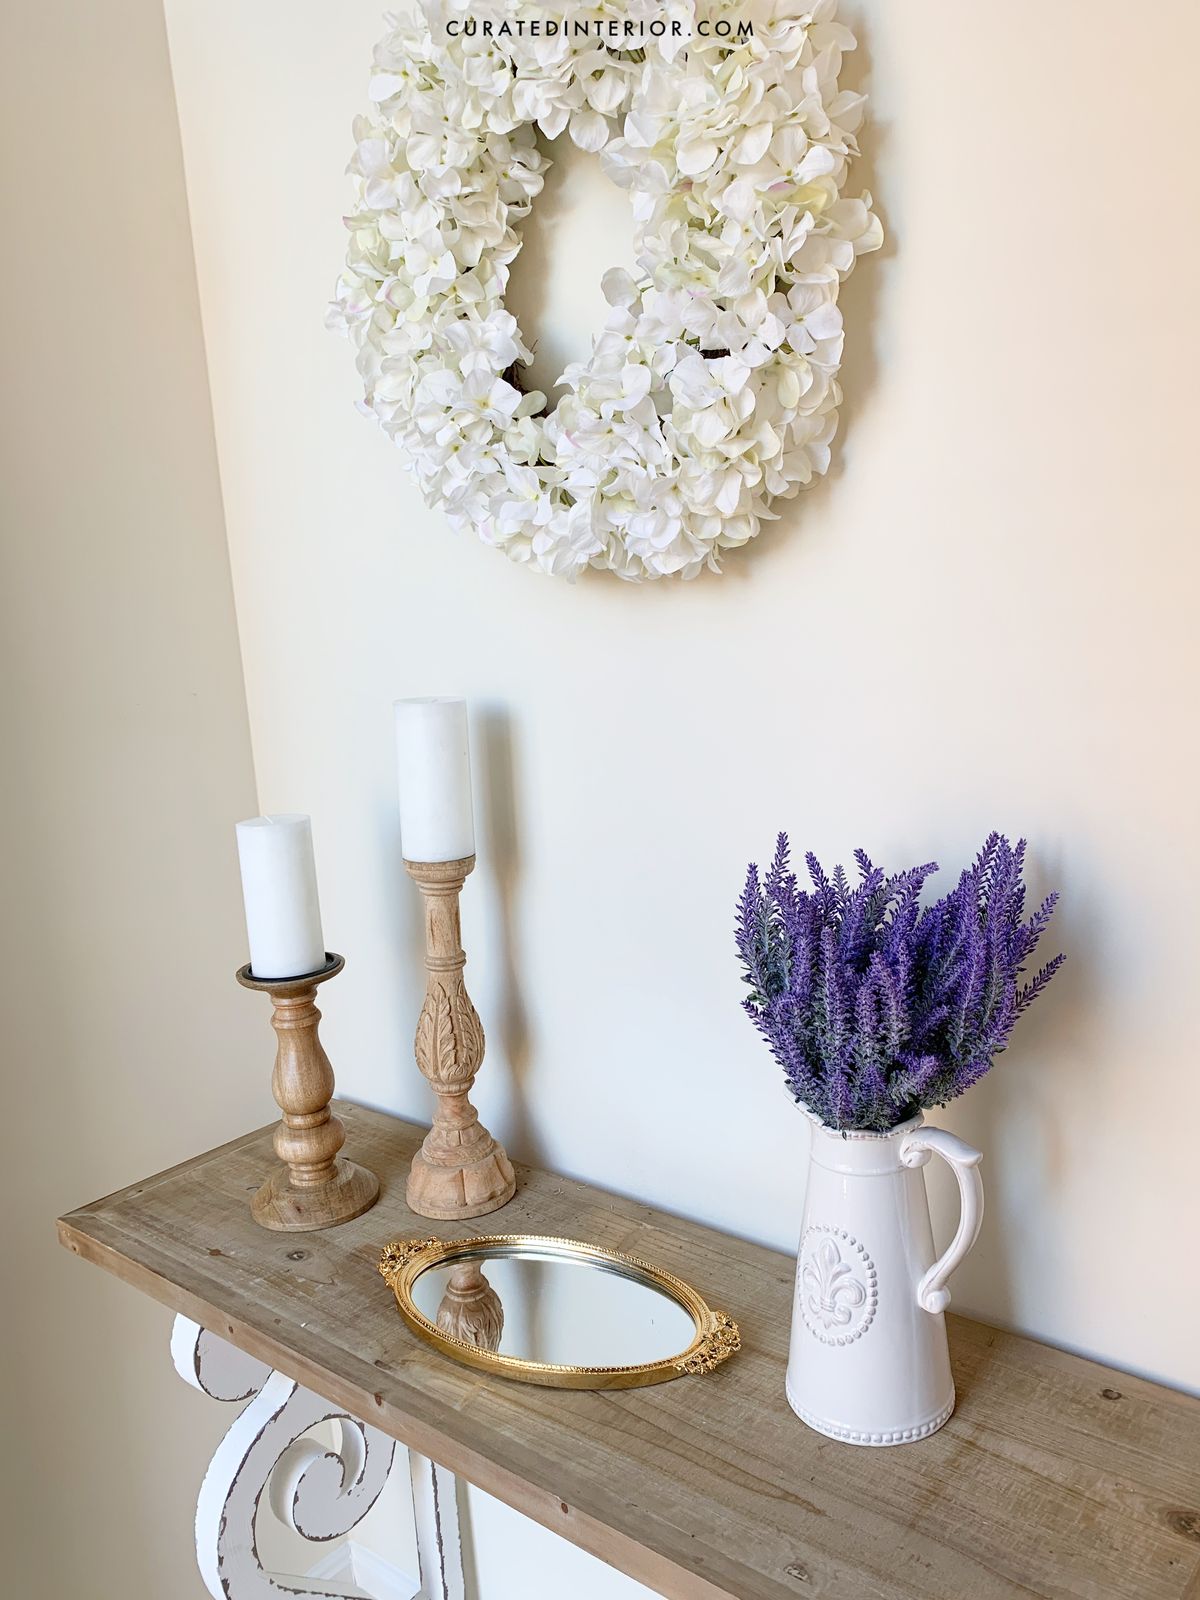 French Country Console Table with Wood Candlesticks, Vintage Mirror Tray and White Pitcher with Lavender